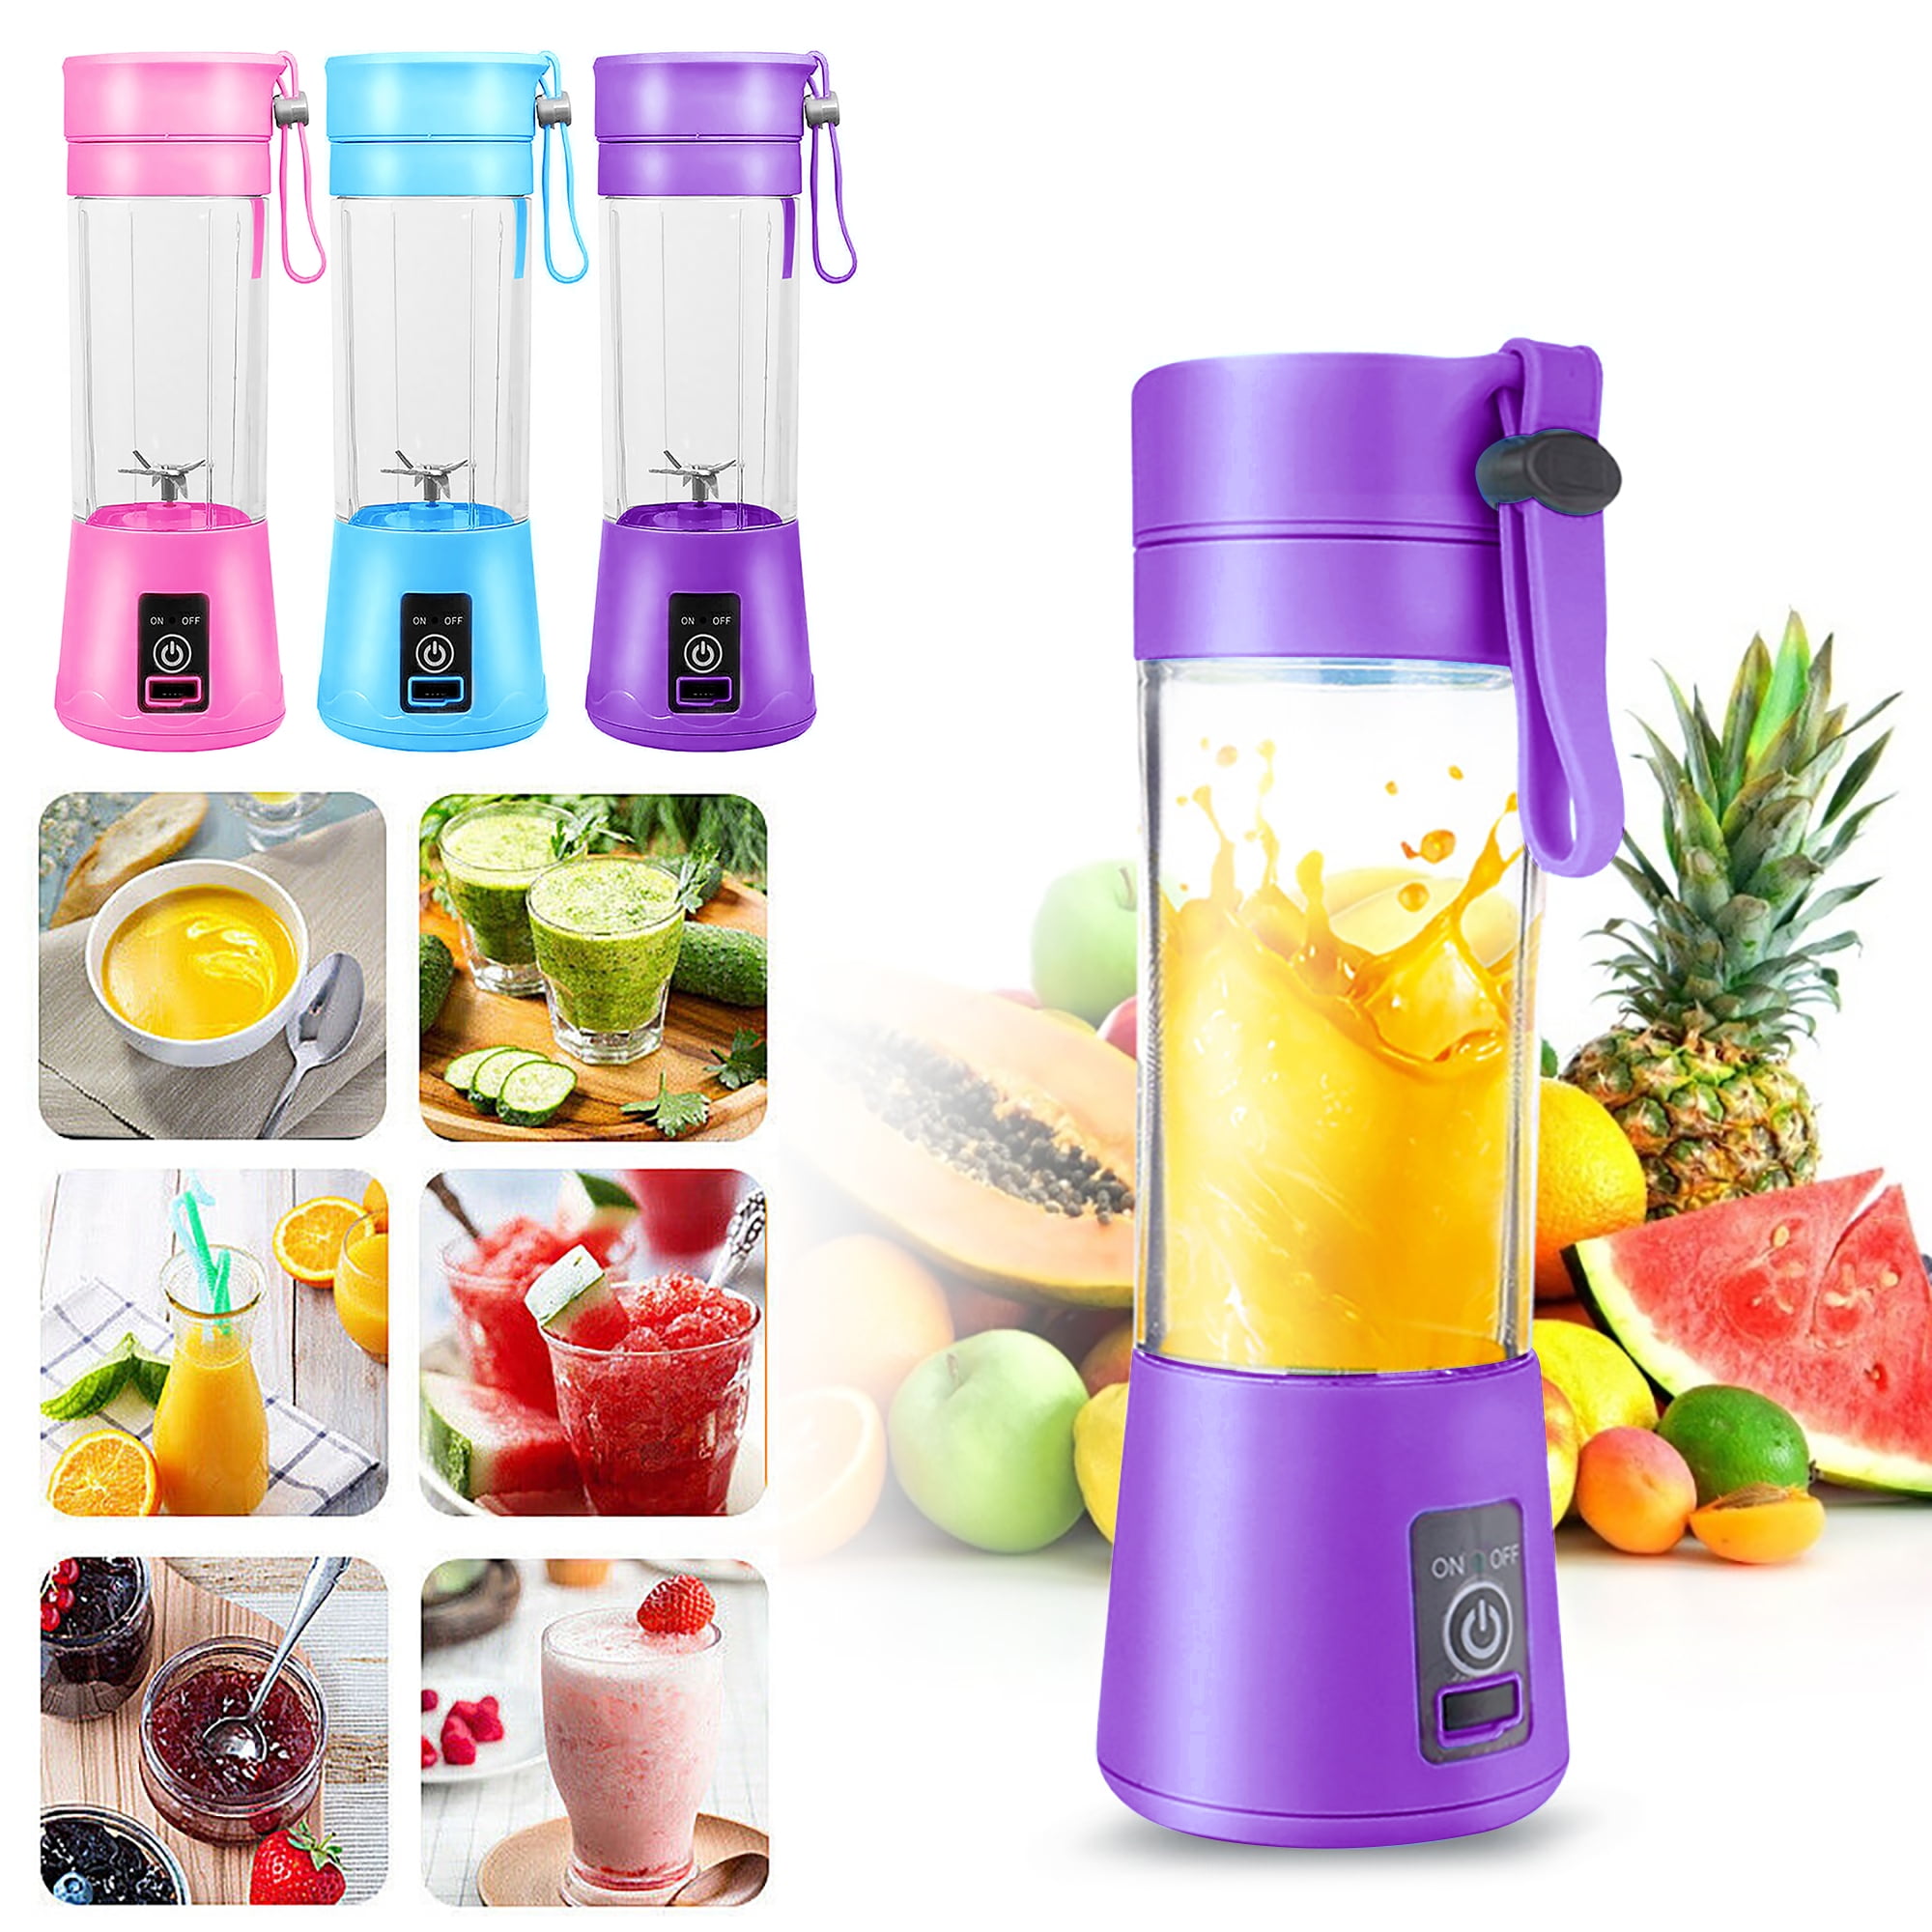 Portable Blender, Personal Mini Juice Blender, USB Rchargeable Juicer Cup with Four Blades, Smoothie Blender Home/Office/Outdoors 380ml Water Bottle